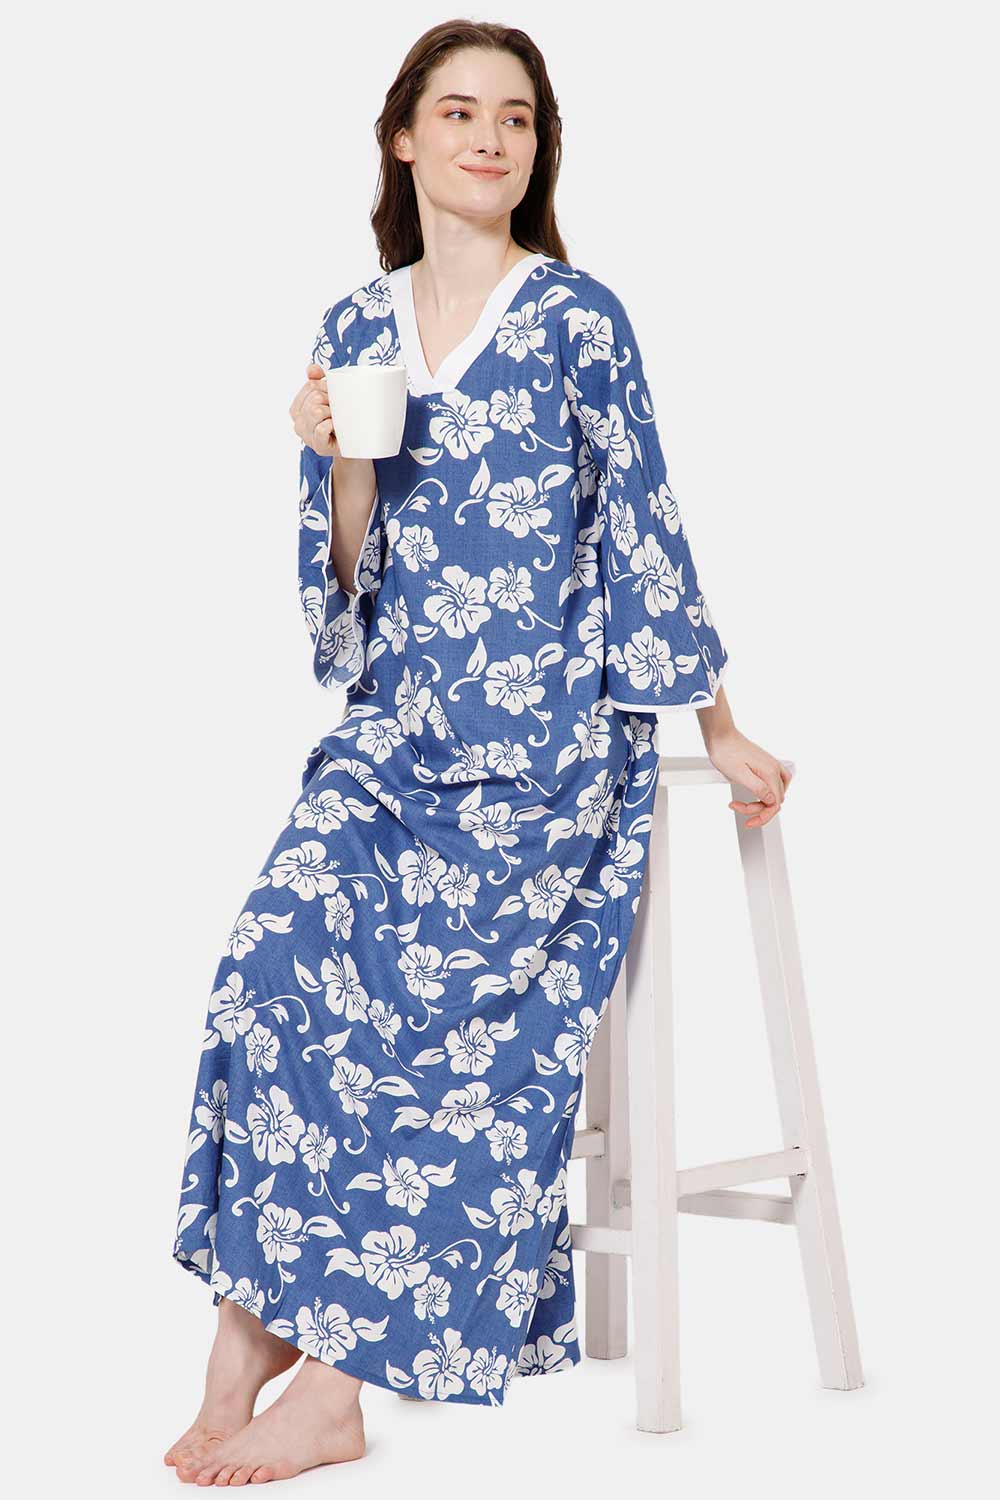 Naidu Hall V Neck Printed Nighty with Long Bell Sleeves - Navy Blue - NT40